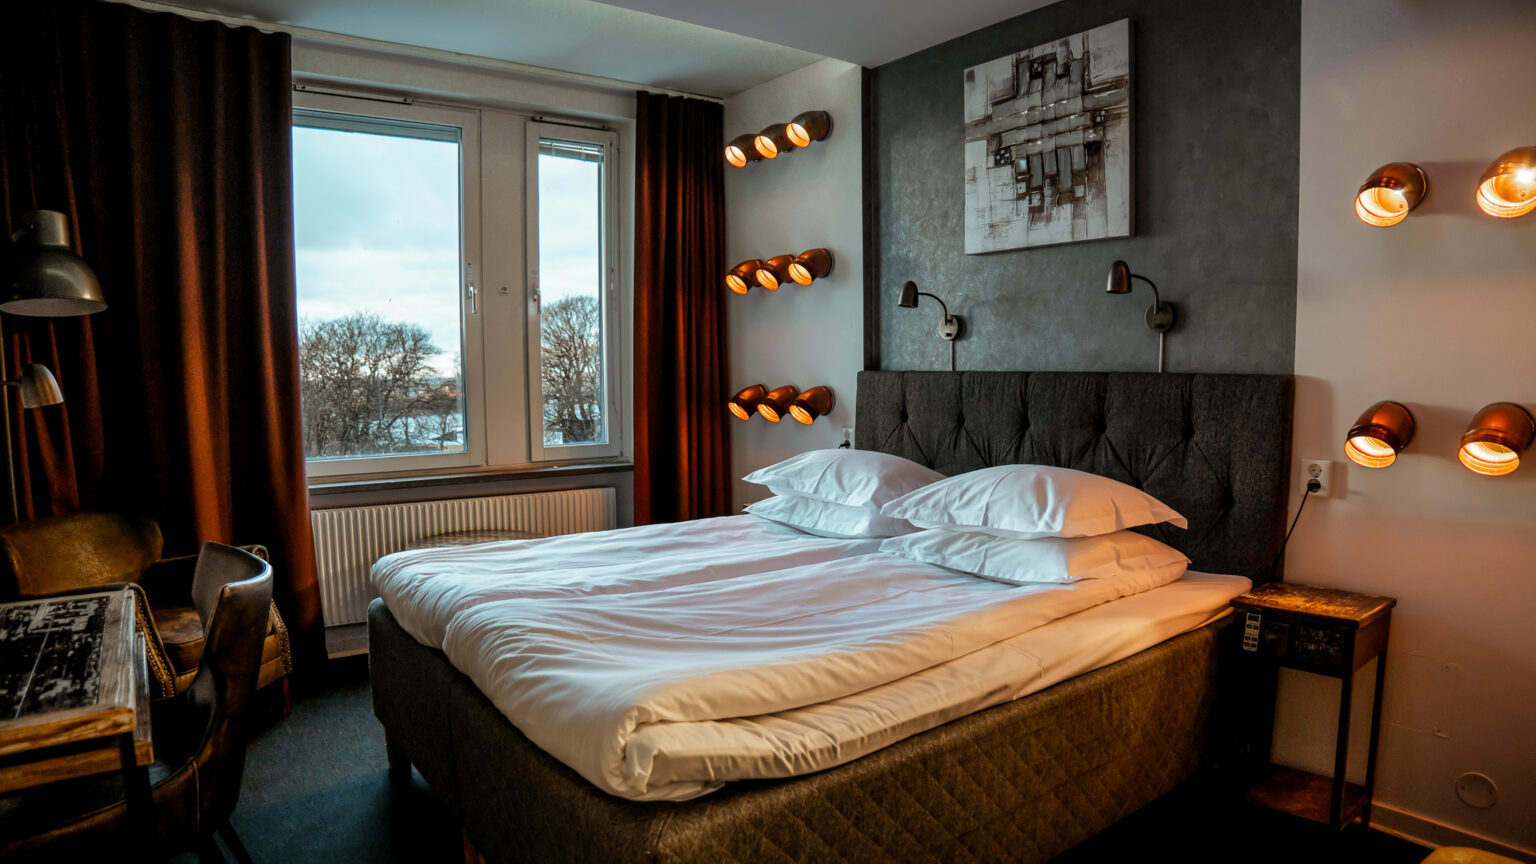 TomaszPikus 1 - Your Ultimate Guide to Sweden - LikeSweden.com - Havshotellet - cozy stay in Malmö not only for the Valentine's Day